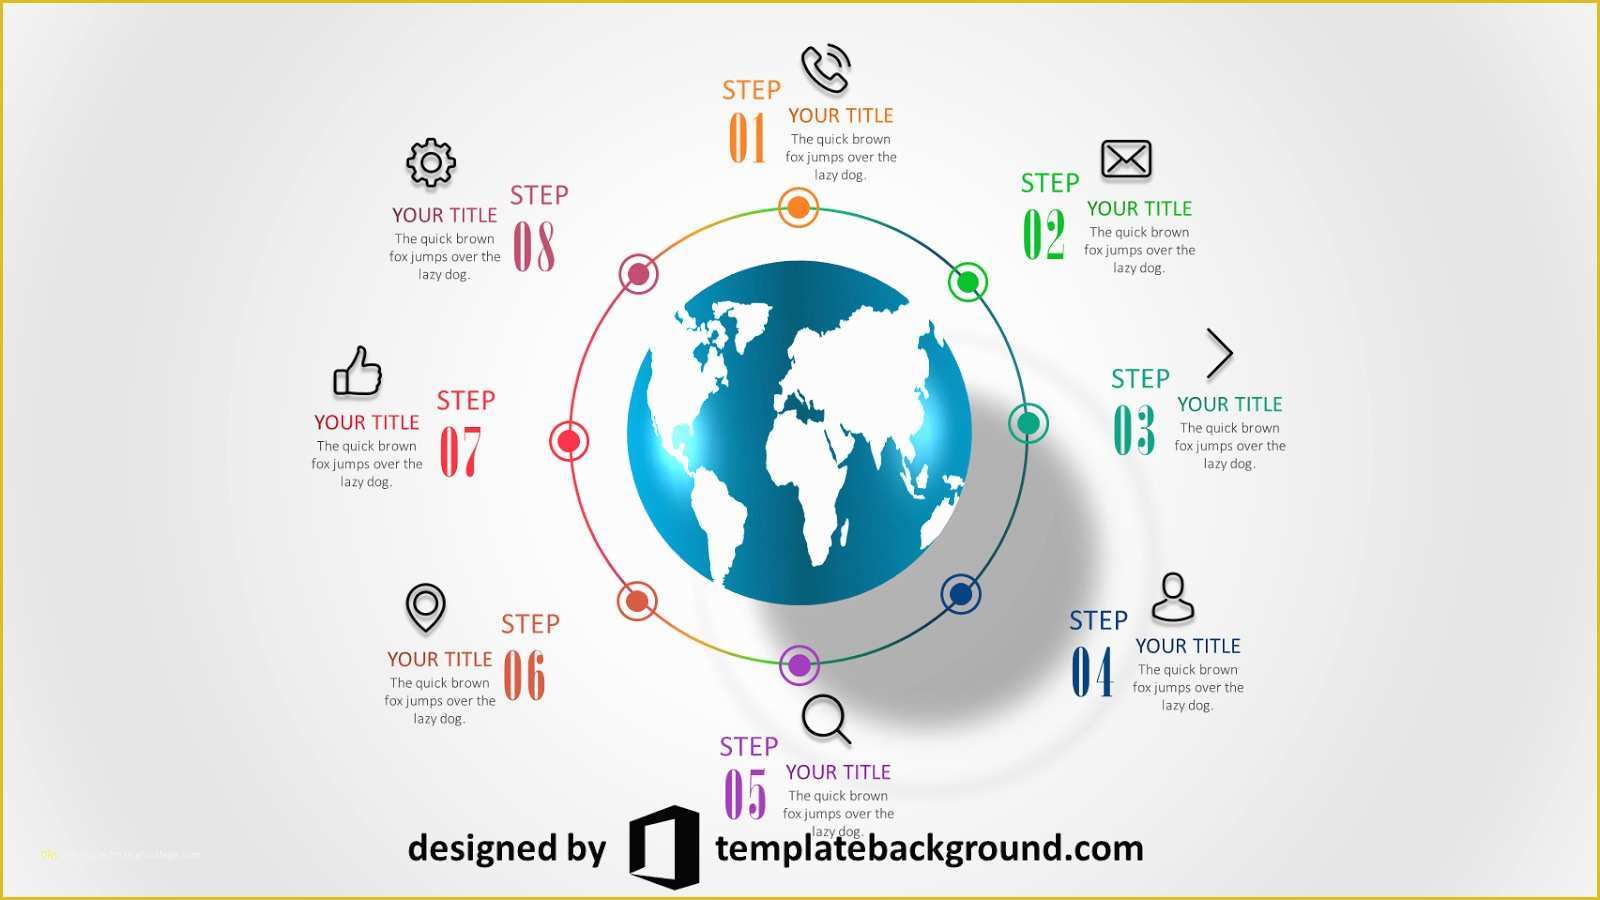 Best Animated Ppt Templates Free Download Of Fresh Best Ppt Templates Free Download